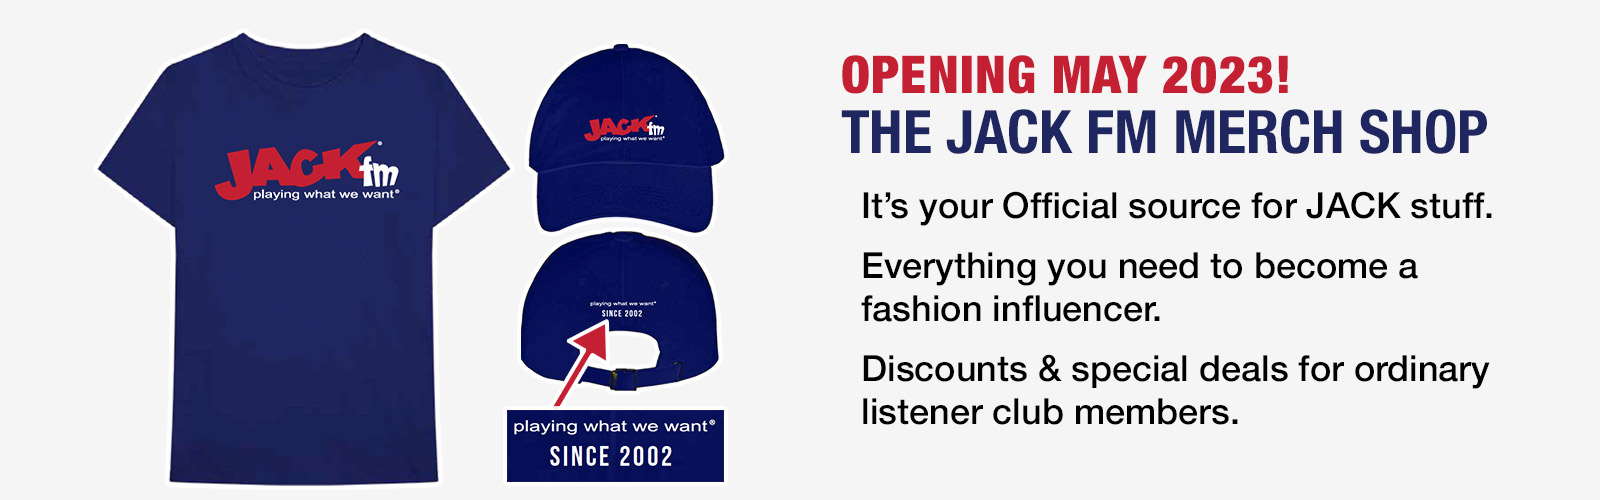 Jack FM Merch store opening May, 2023